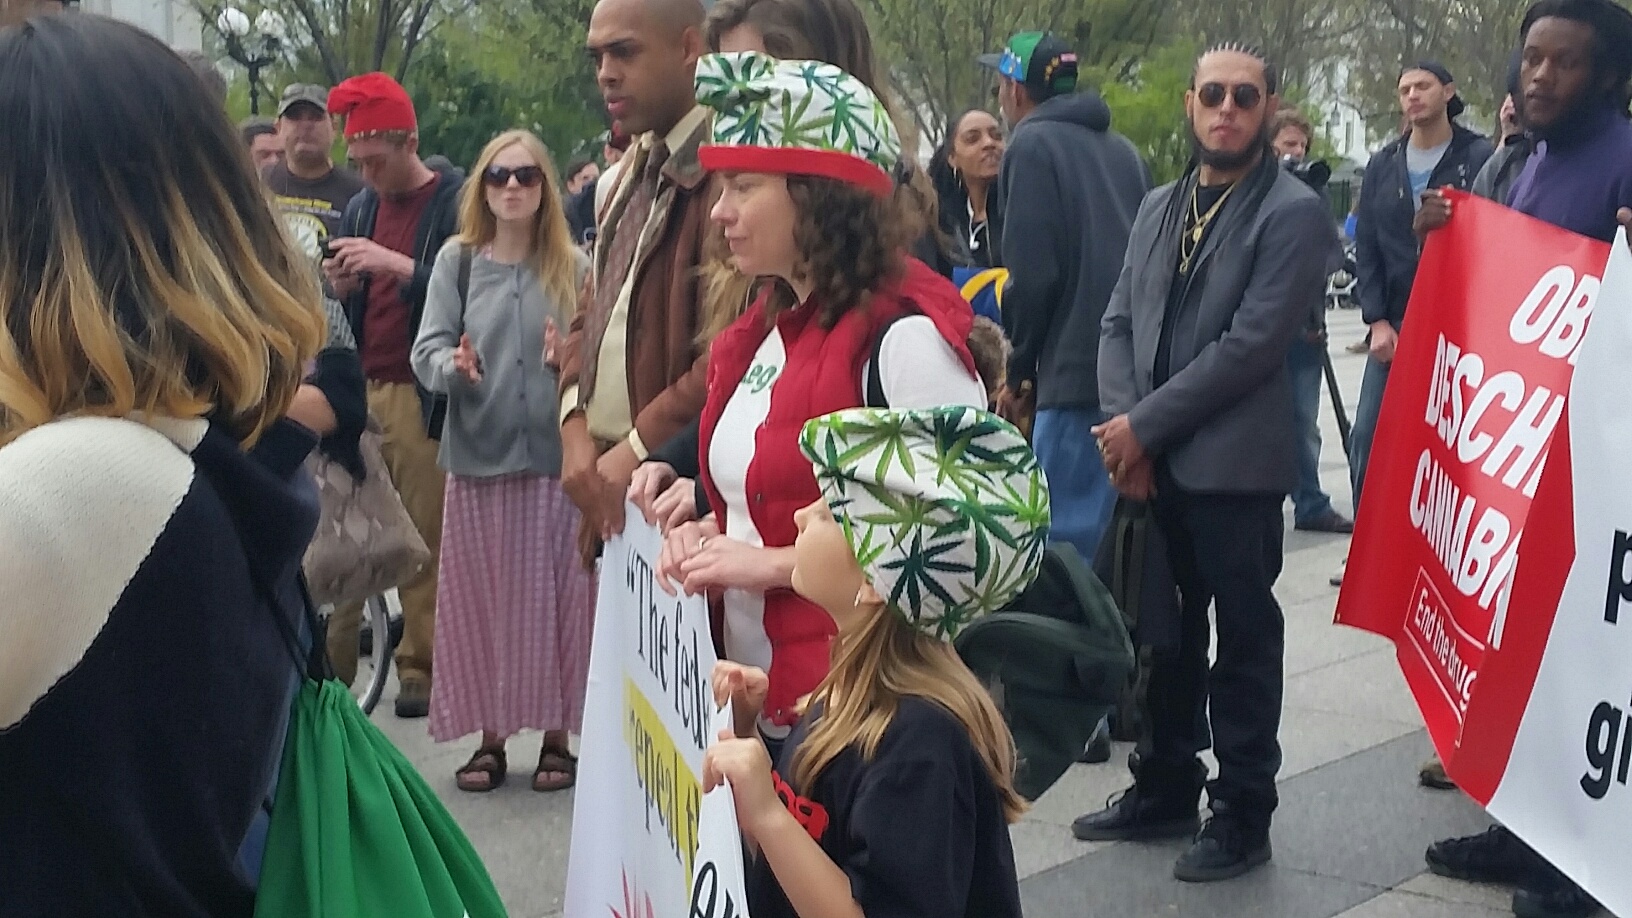 This is the scene from a protest outside the White House on Saturday, March 2, 2016. Pro-marijuana activists say President Barack Obama should remove pot from the list of Schedule 1 controlled substances, which includes heroin and other addictive drugs. (WTOP/Kathy Stewart)